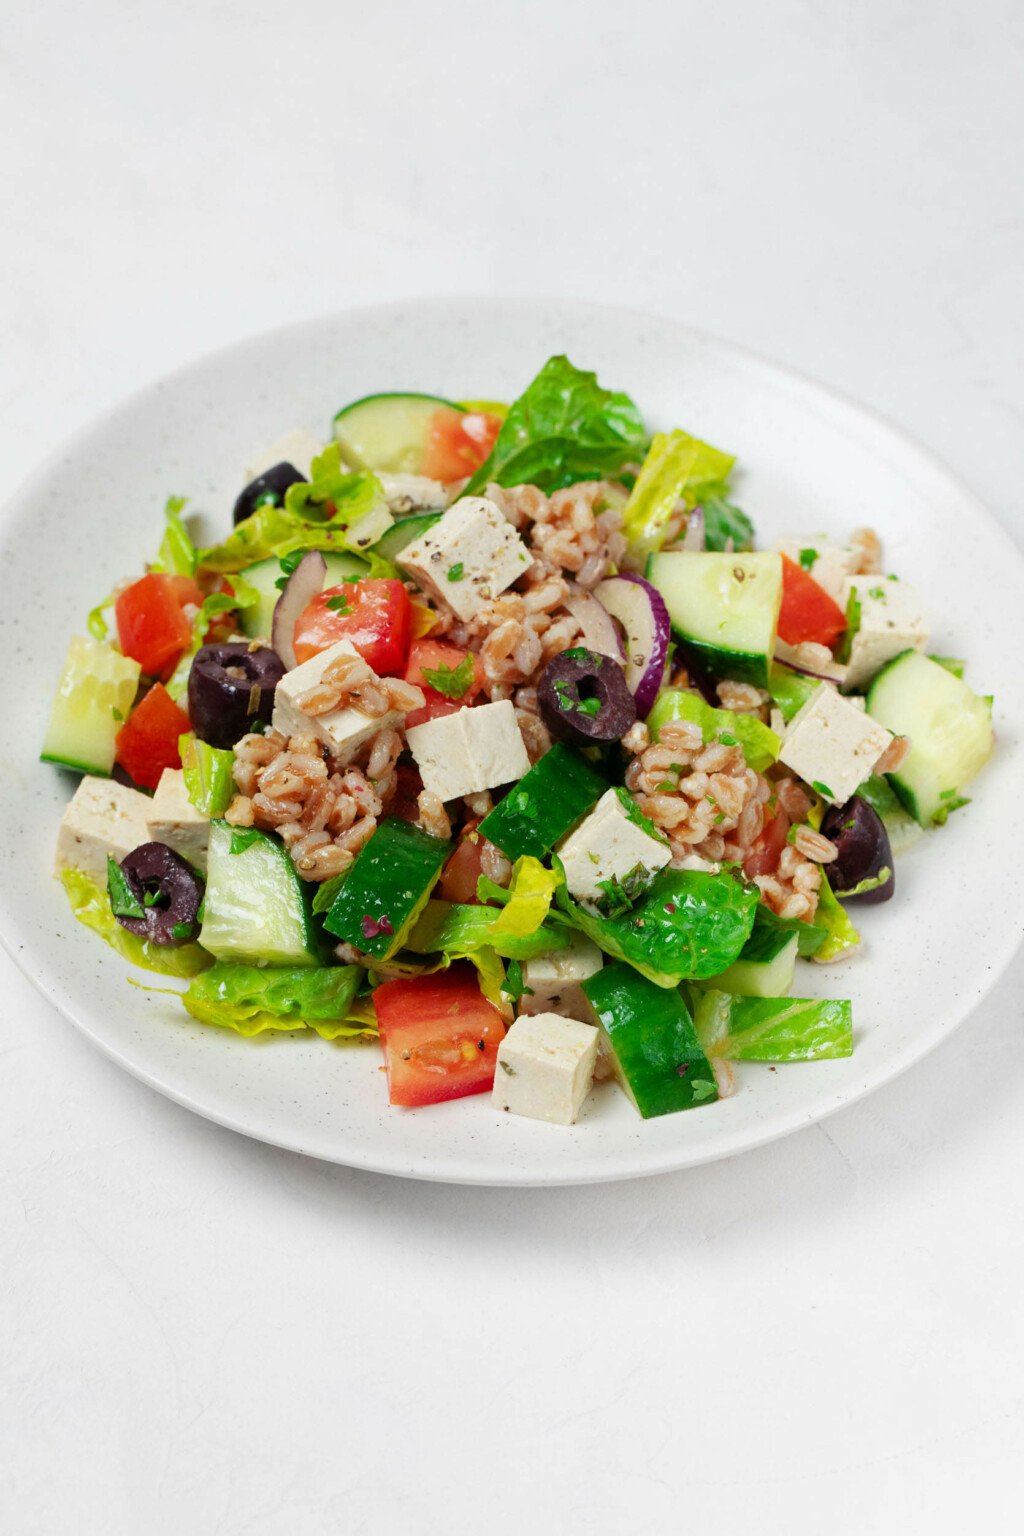 A white, round plate is covered in a colorful, fresh salad with romaine, barley, red onion, and tomatoes.